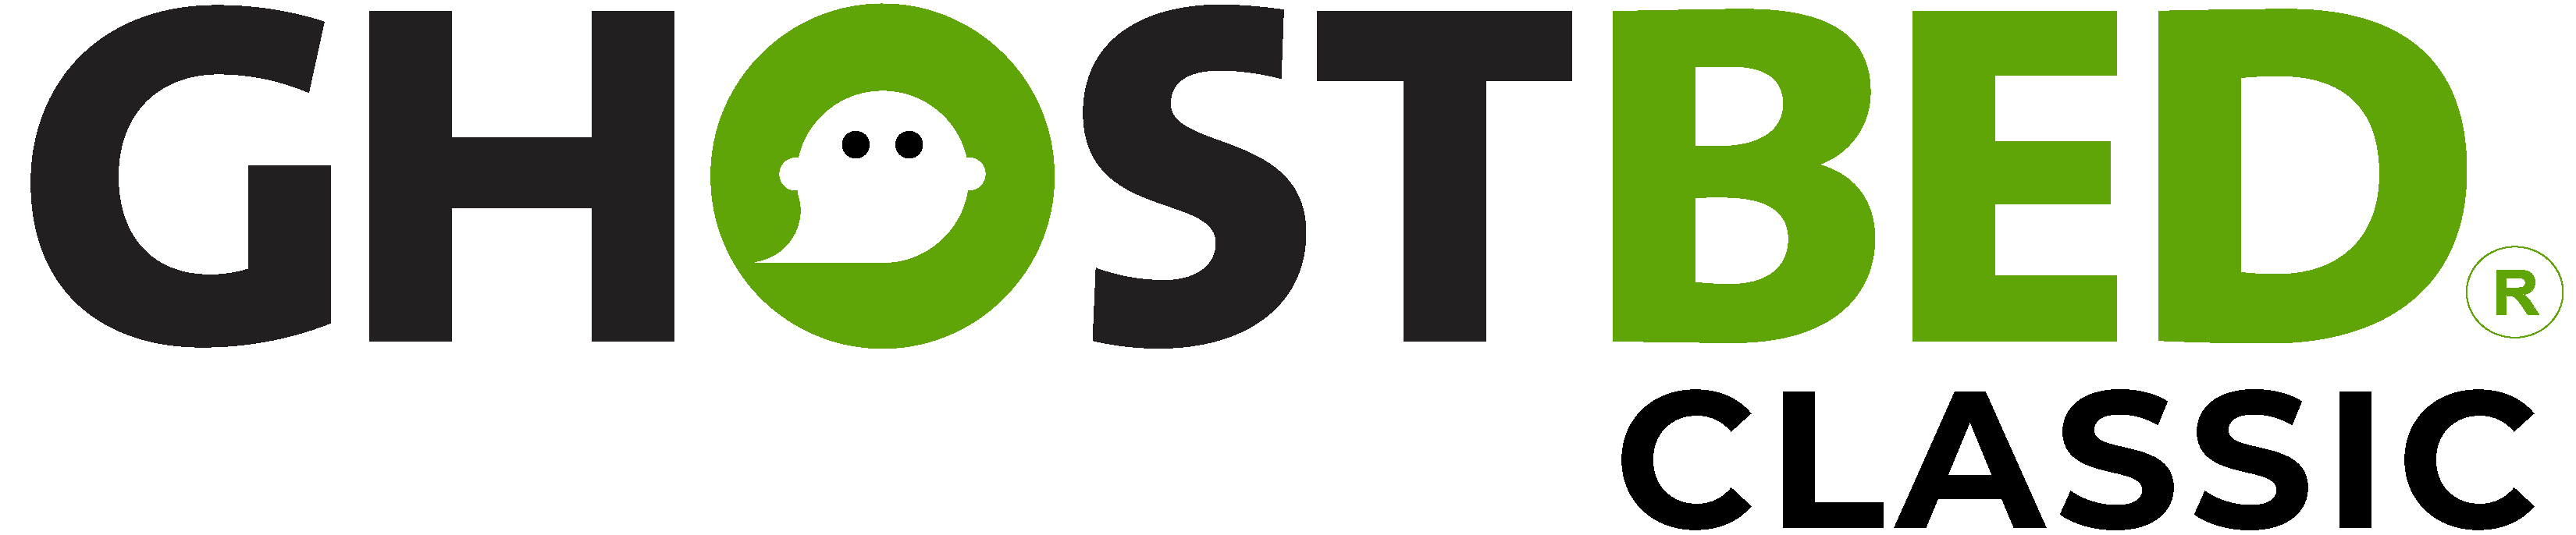 GhostBed Classic Logo